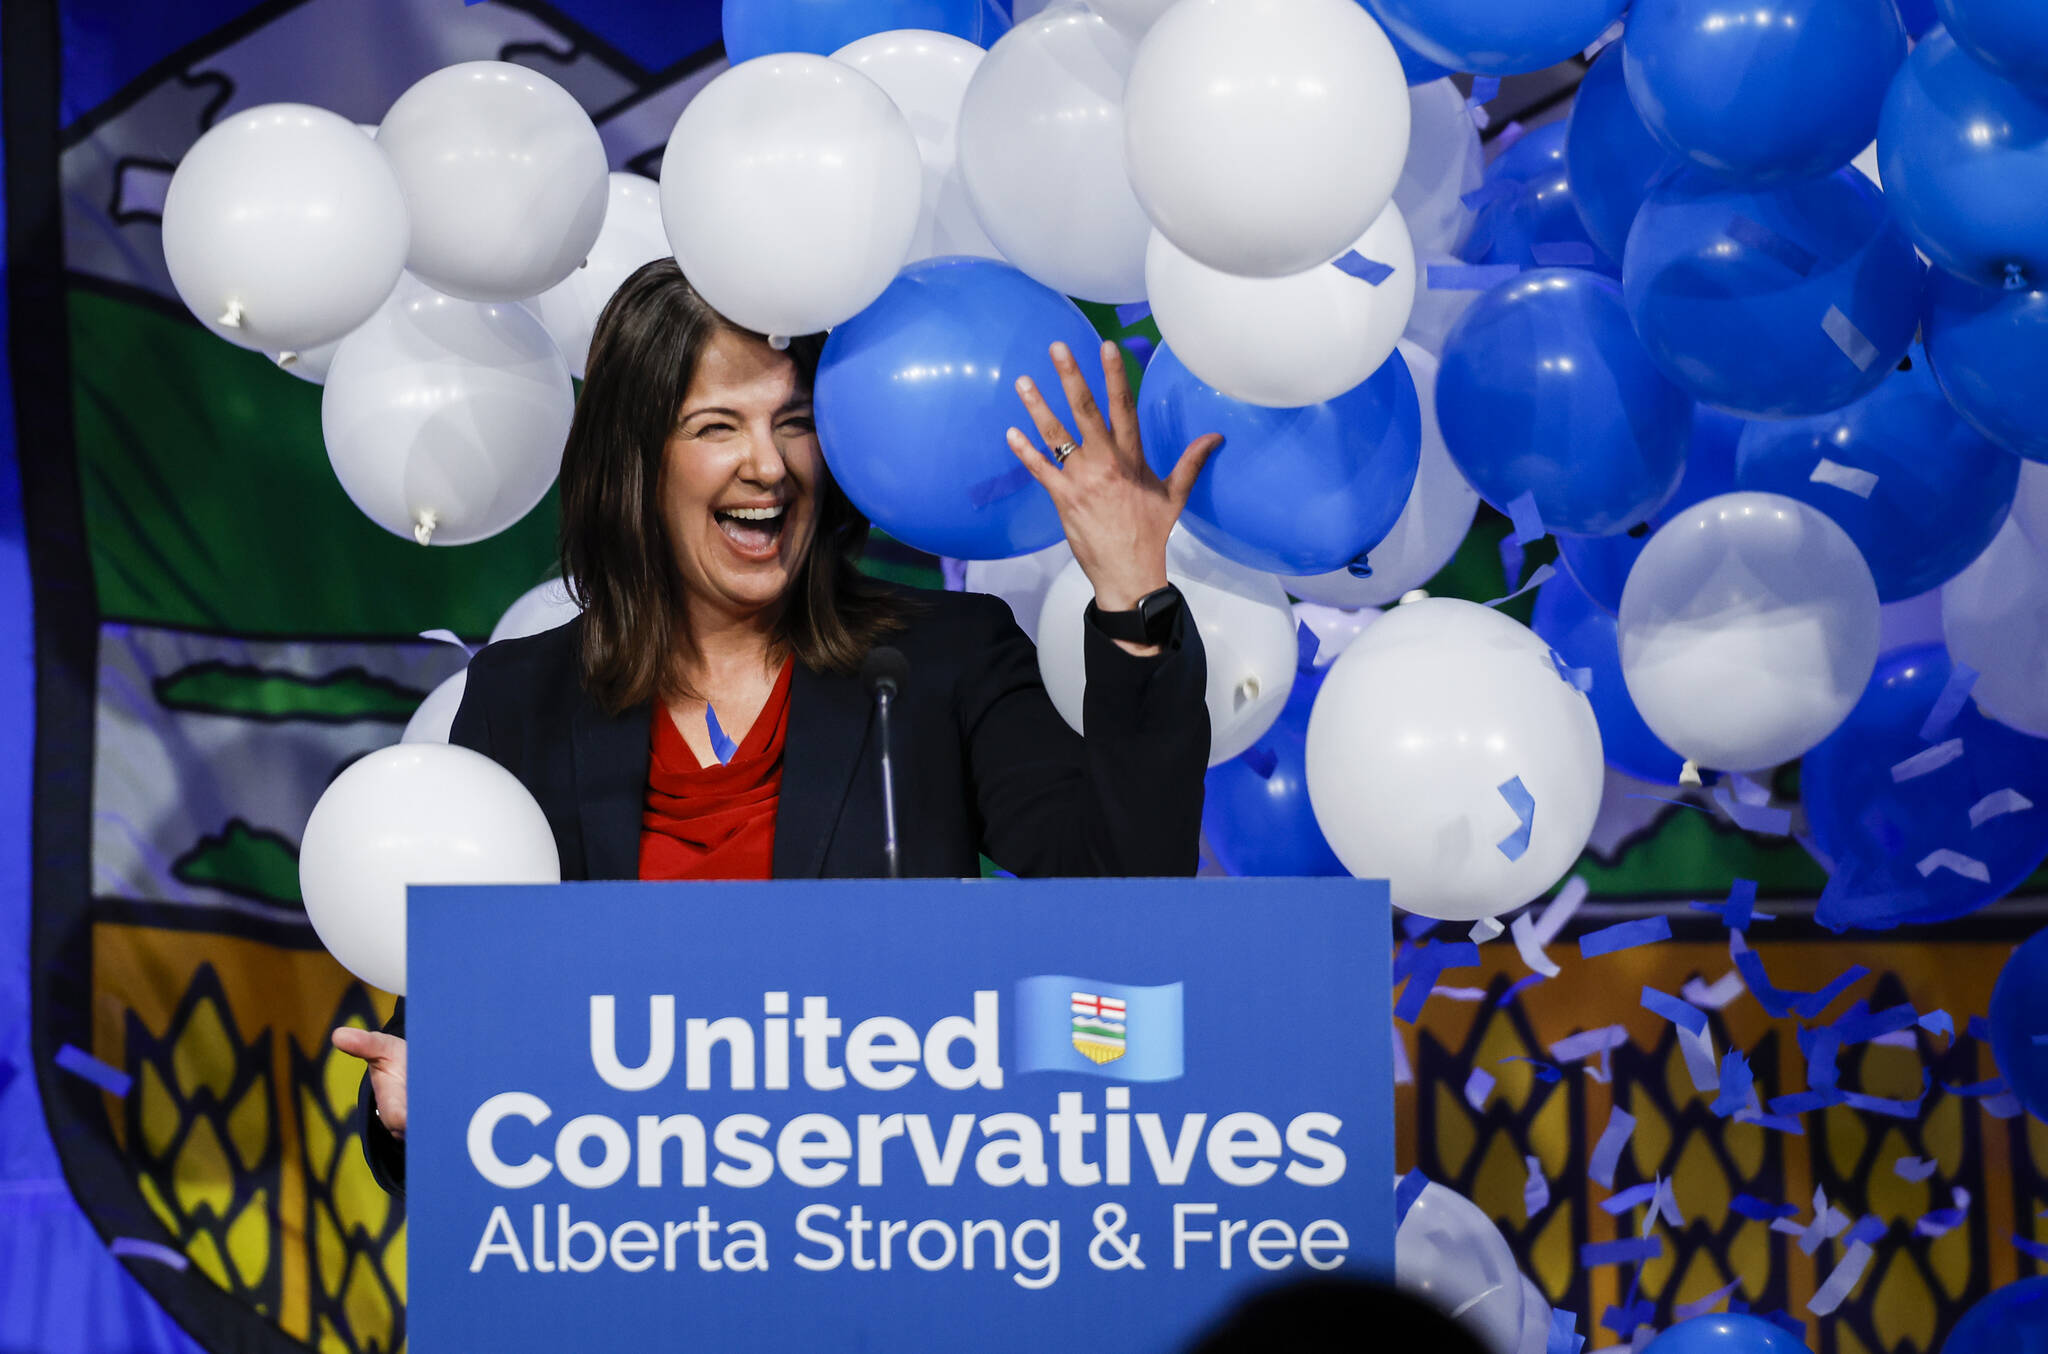 Danielle Smith celebrates after being chosen as the new leader of the United Conservative Party and next Alberta premier in Calgary, Alta., Thursday, Oct. 6, 2022.THE CANADIAN PRESS/Jeff McIntosh